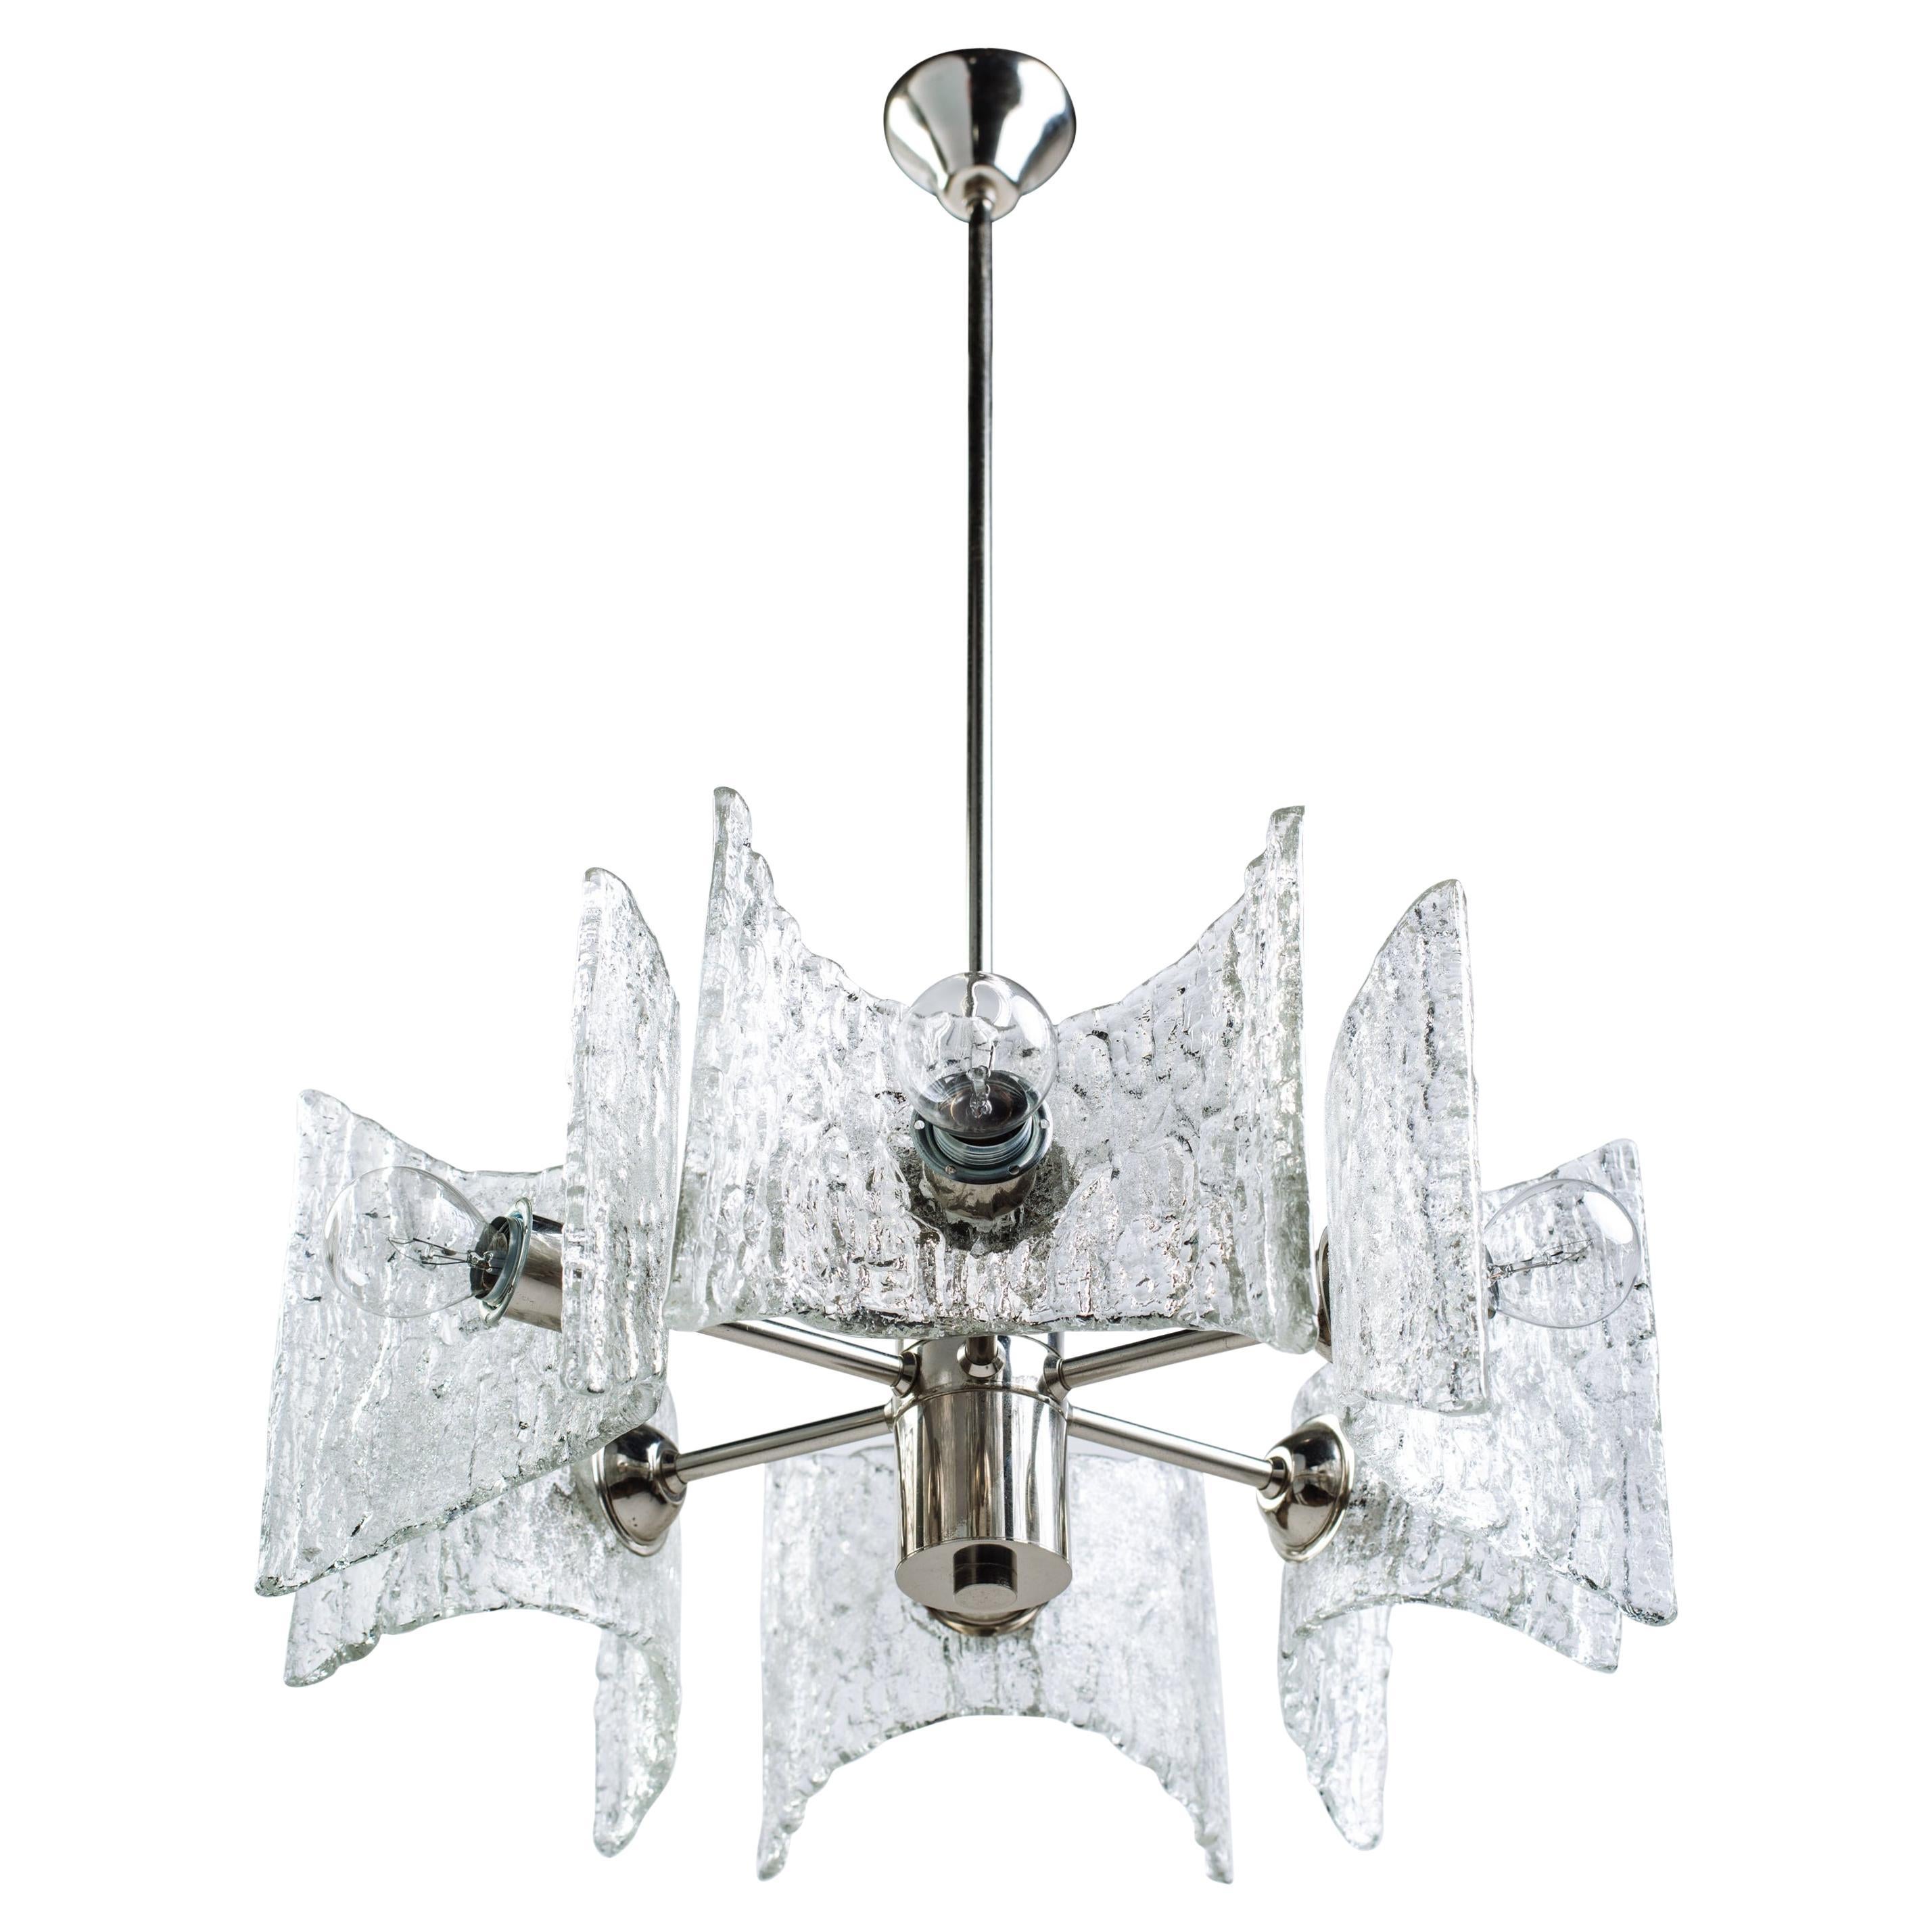 Mid-Century Modern Textured Glass Chandelier by Kalmar, Germany, circa 1960s For Sale